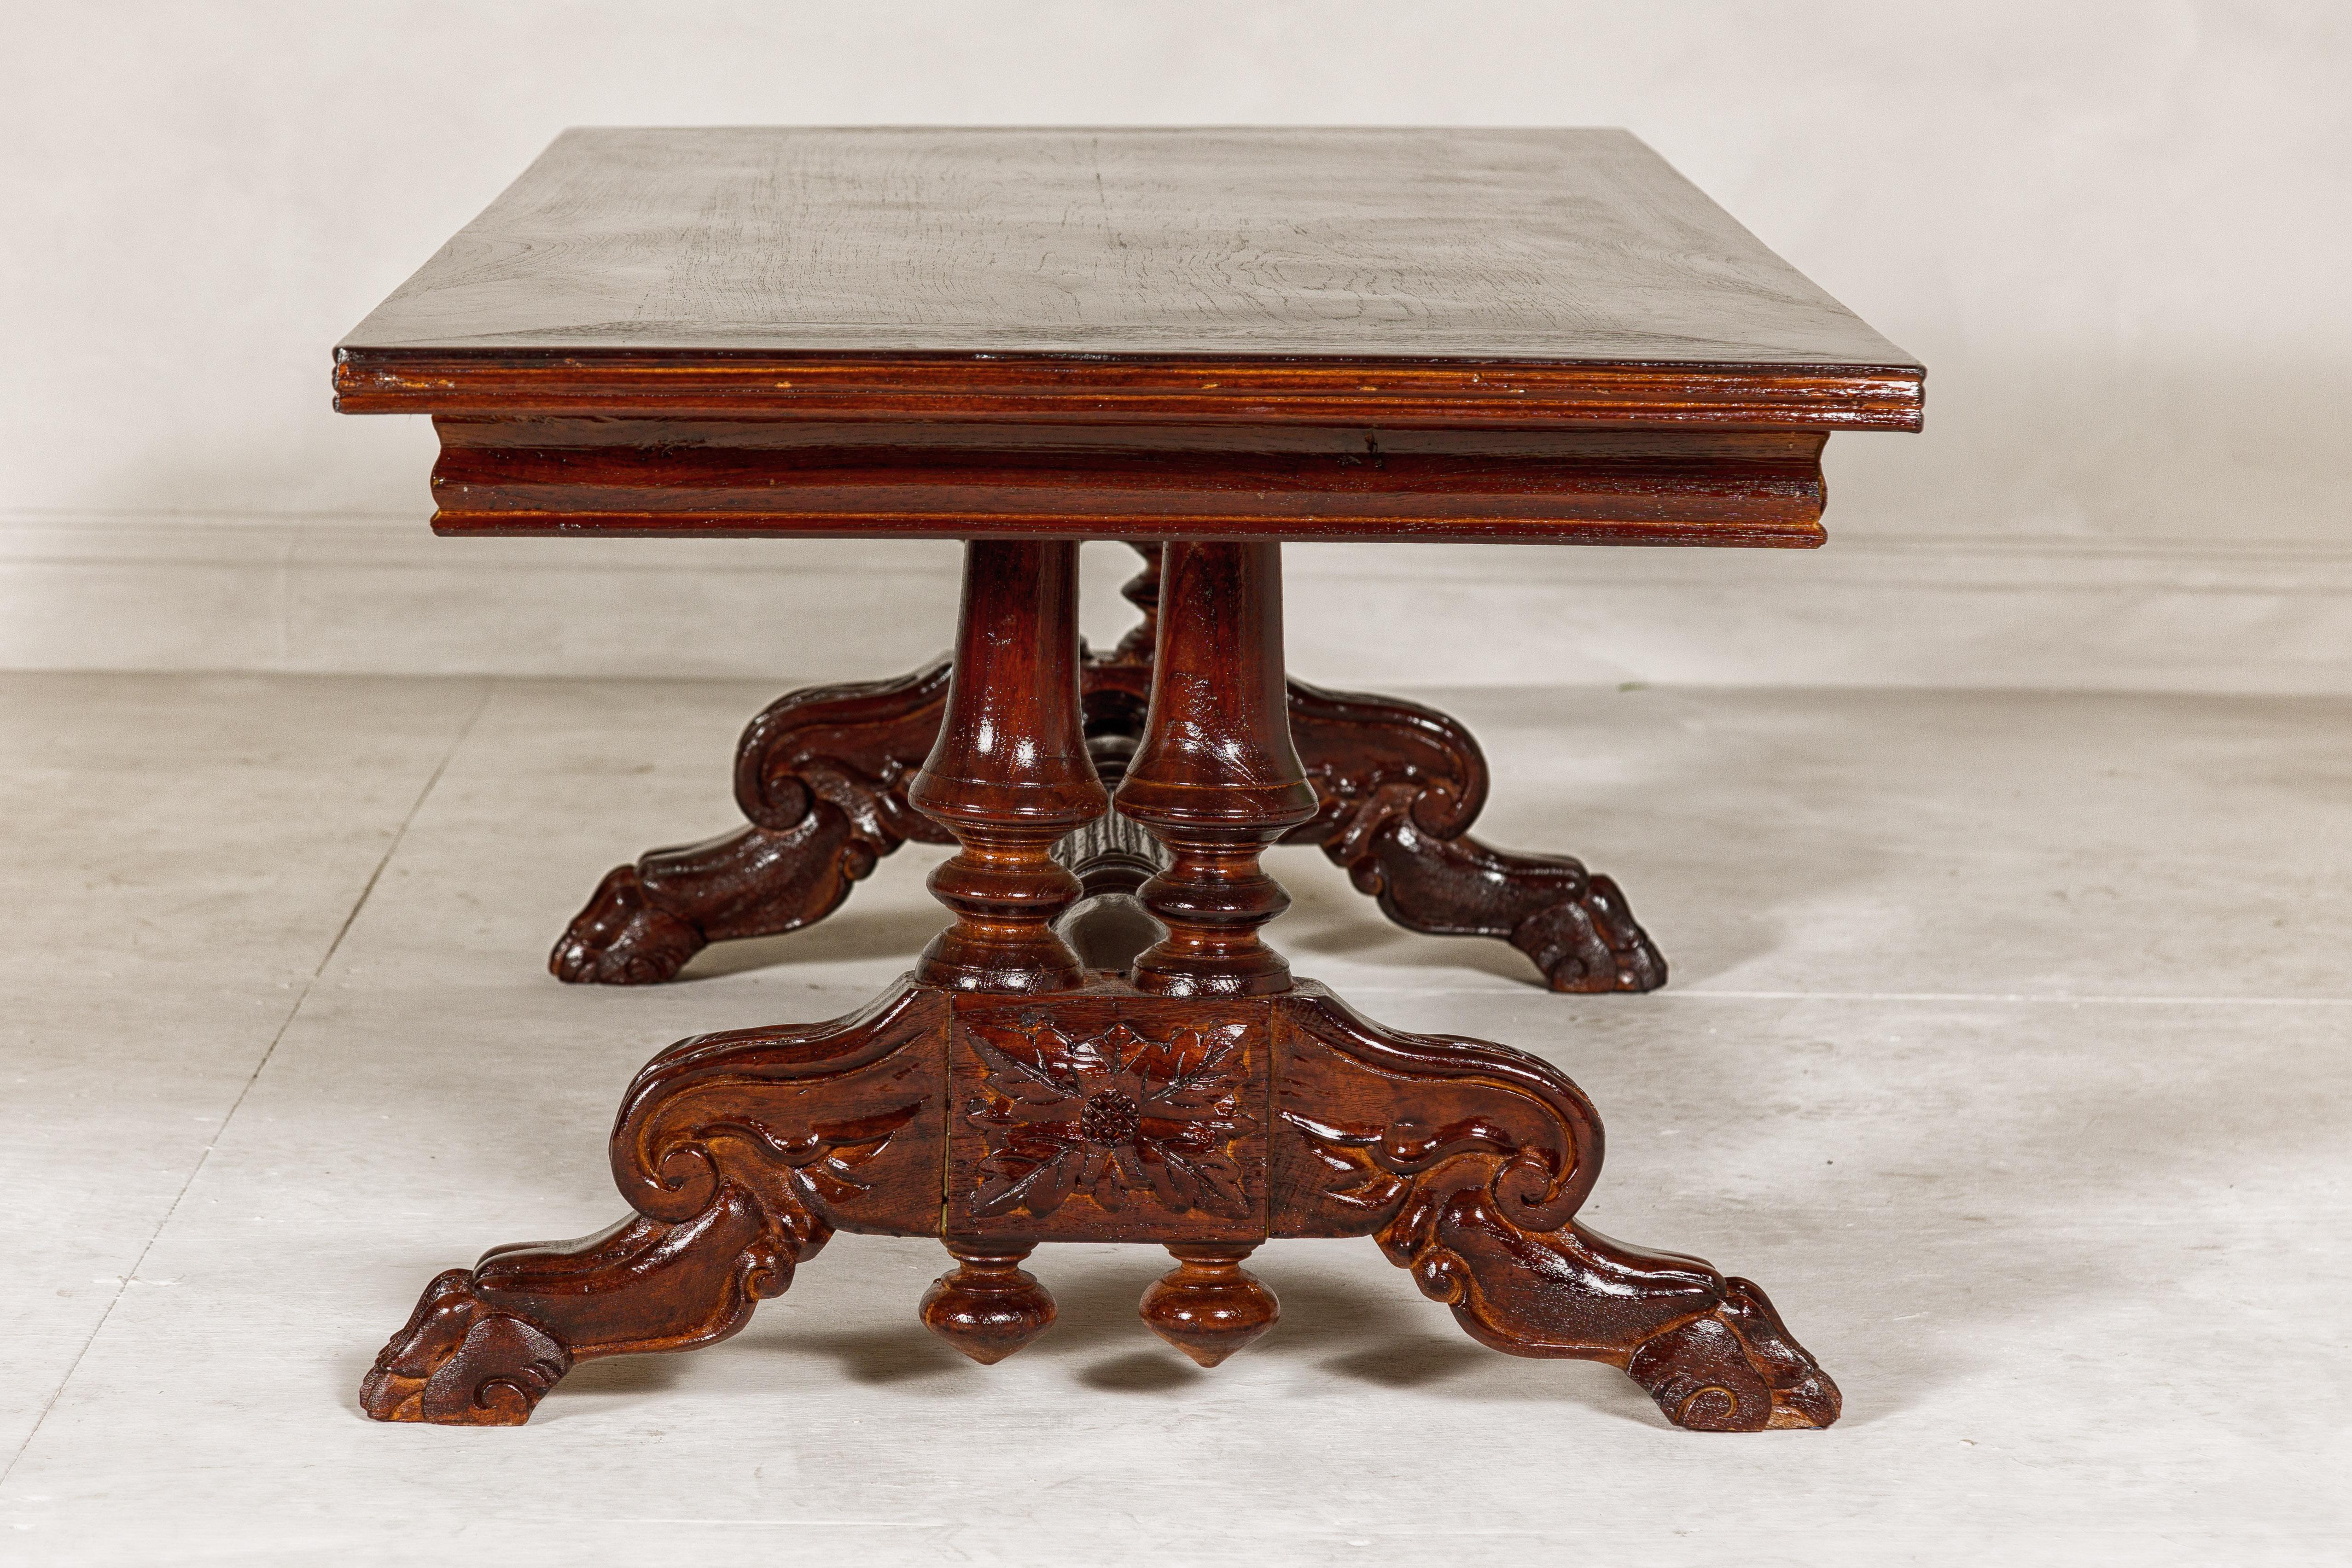 Dutch Colonial Ornate Coffee Table with Carved Lion Paw Legs and Cross Stretcher For Sale 10